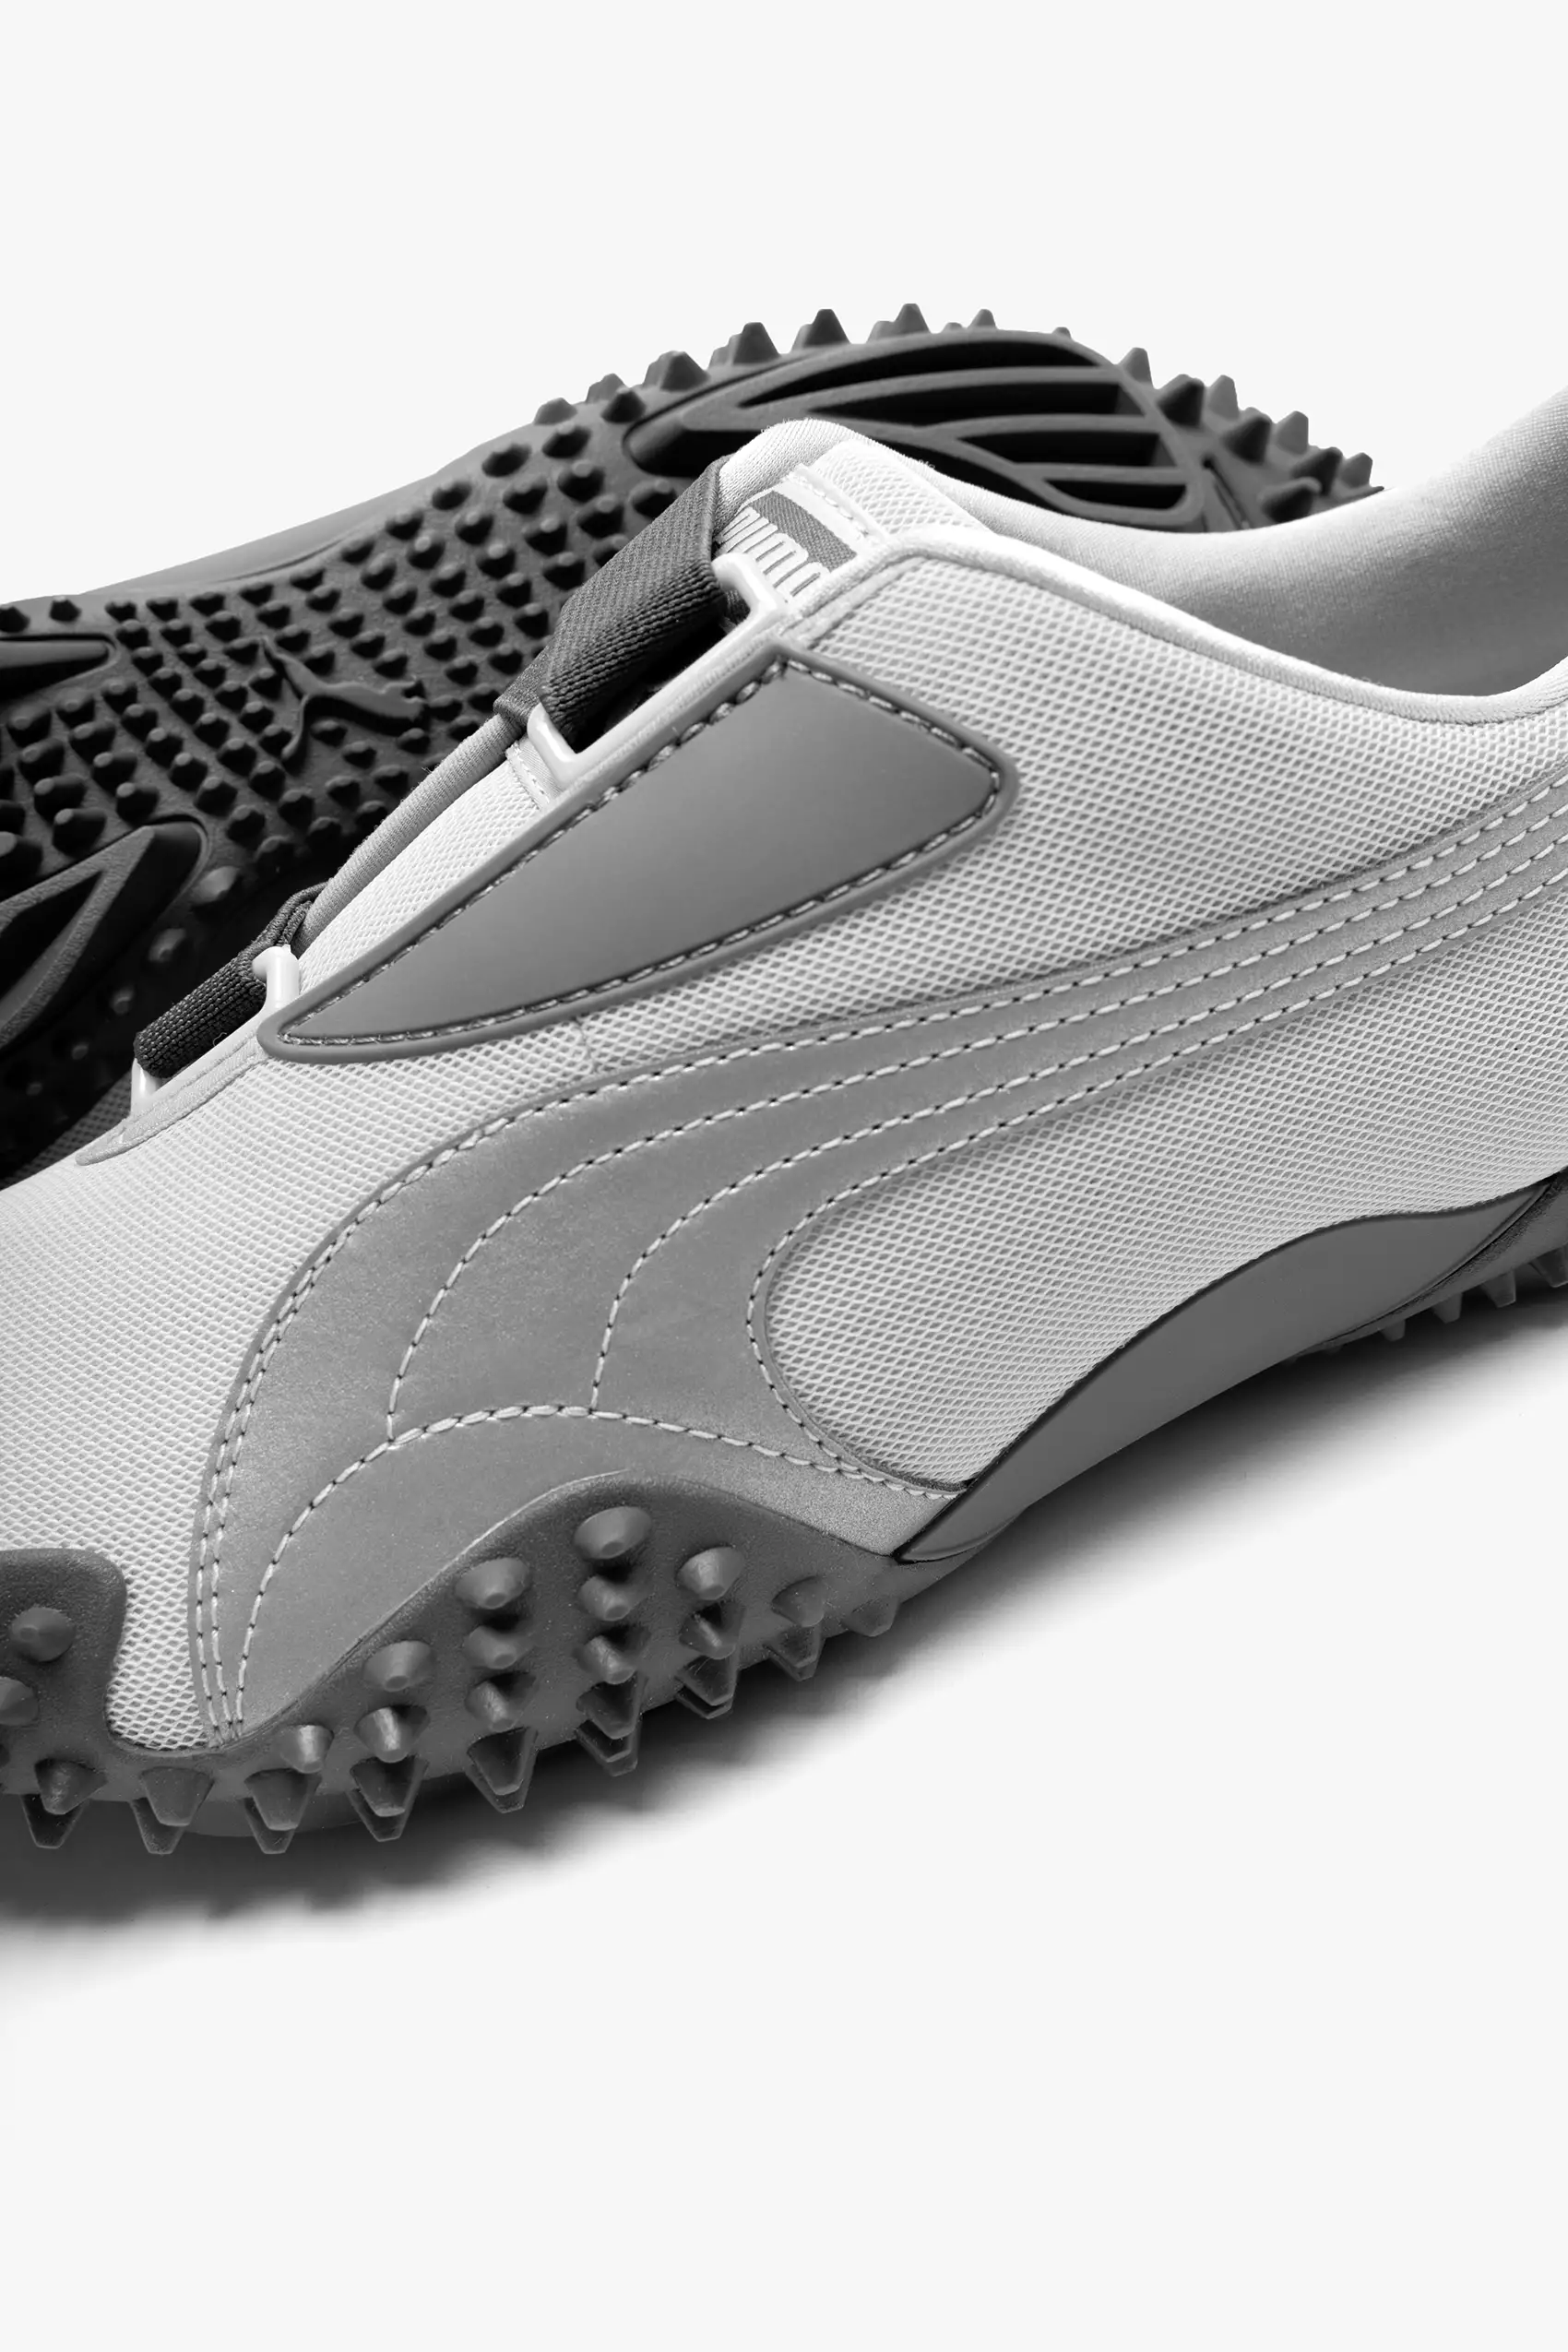 PUMA Mostro, The Cryogenic Classic Thaws Out for a New Generation